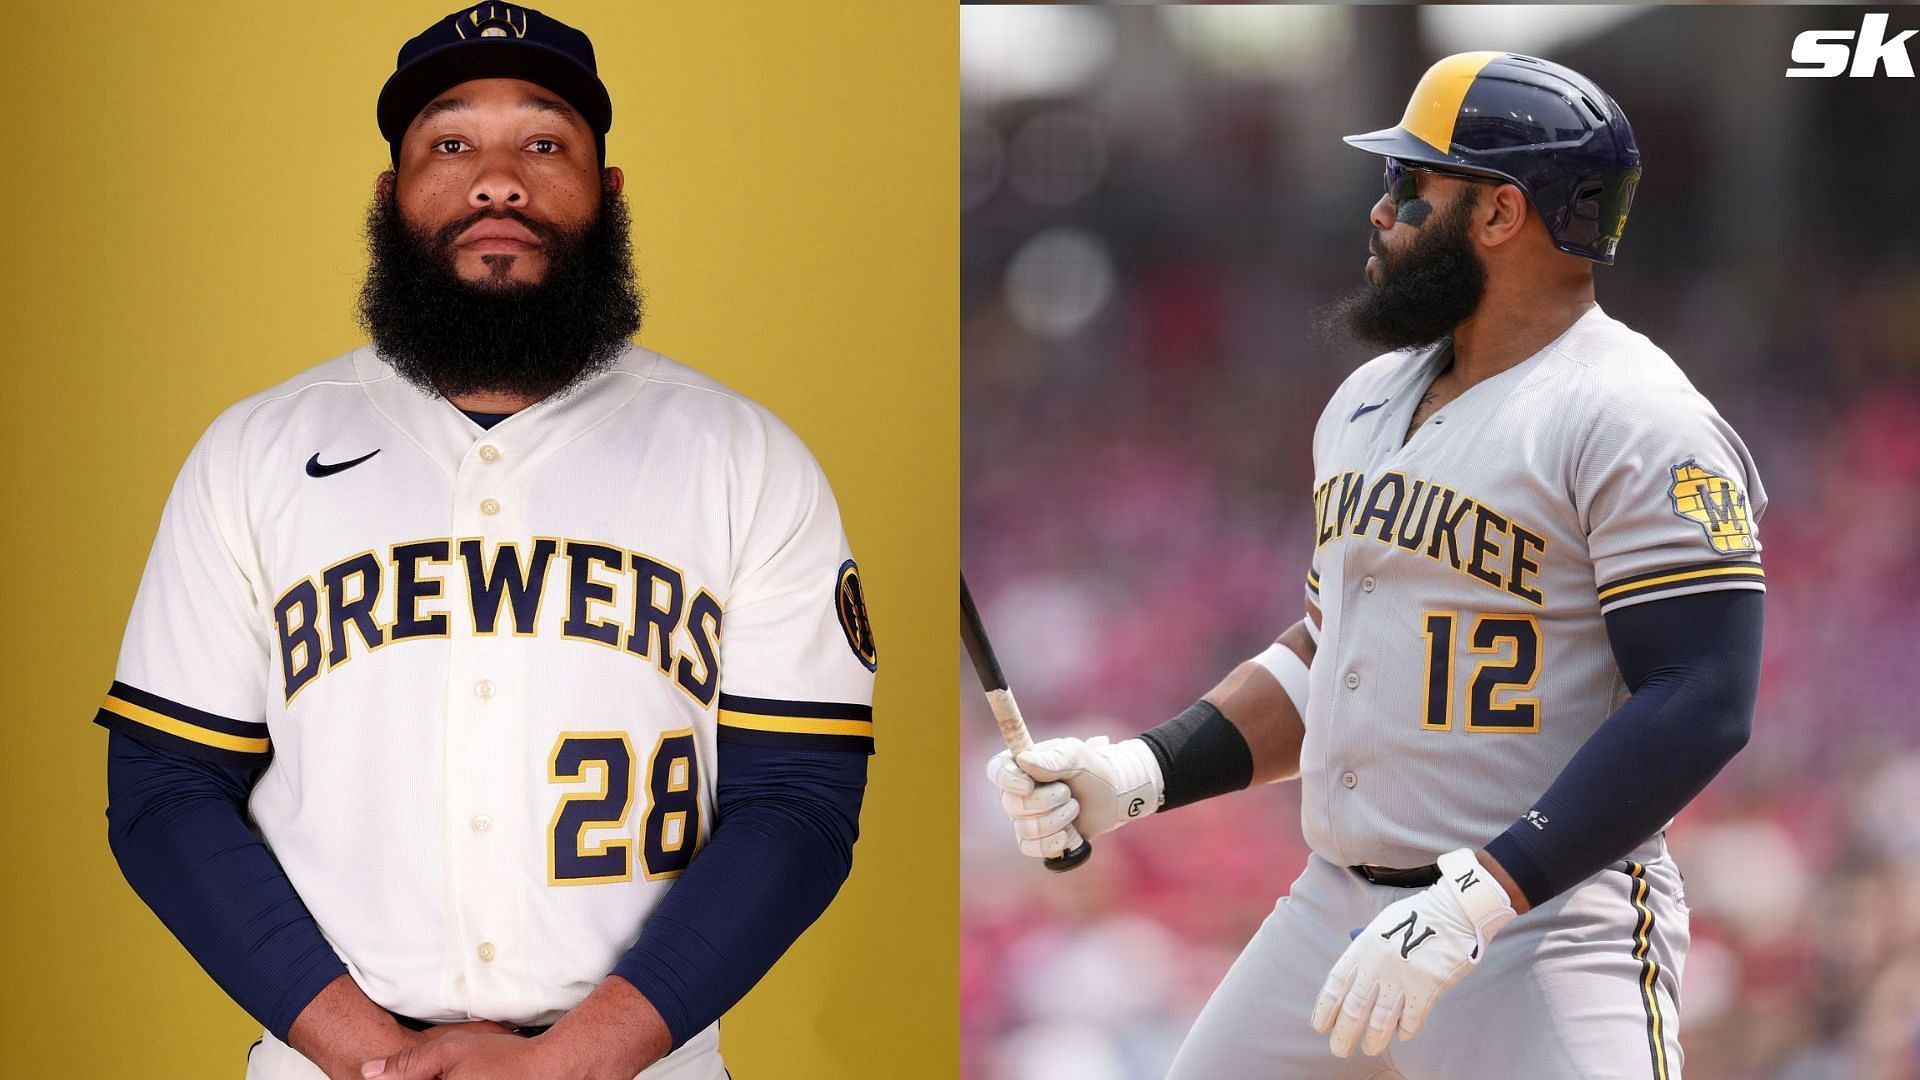 When Jon Singleton, previously suspended thrice from MLB, sought comeback opportunity with the Brewers